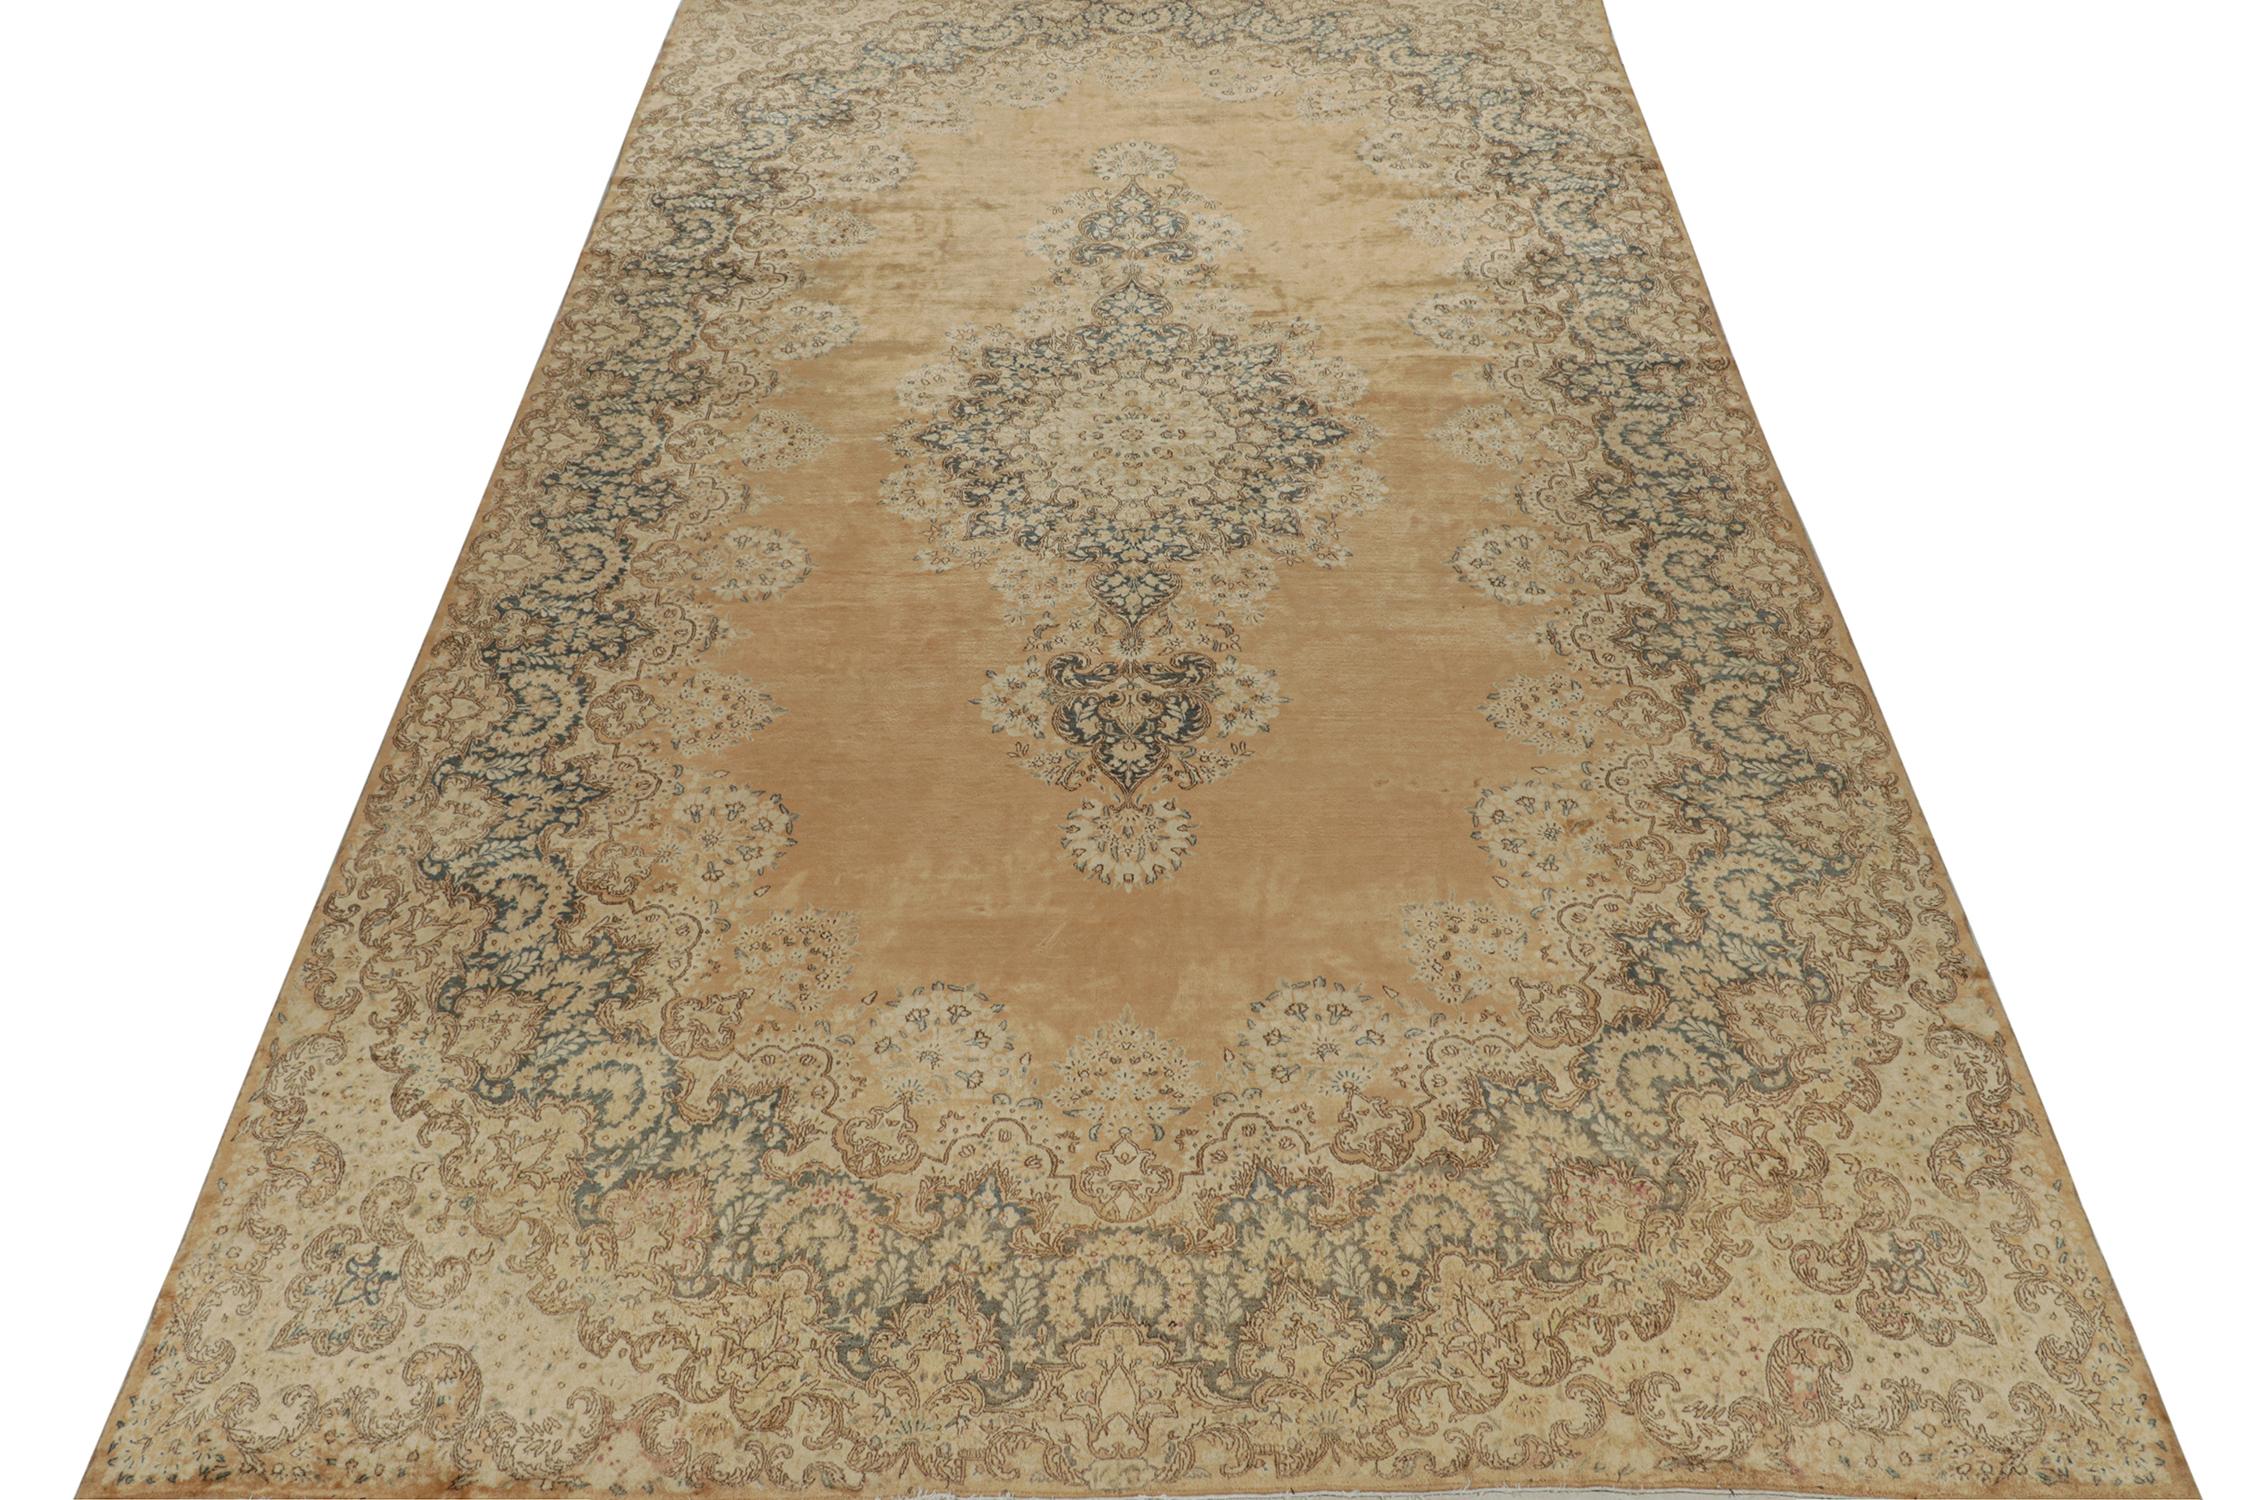 This antique 9x17 Persian rug is a rare curation of intriguing provenance. Hand-knotted in wool, it’s believed to originate circa 1880-1890.

Further On the Design:

This antique piece is a royal selection that enjoys a medallion with floral